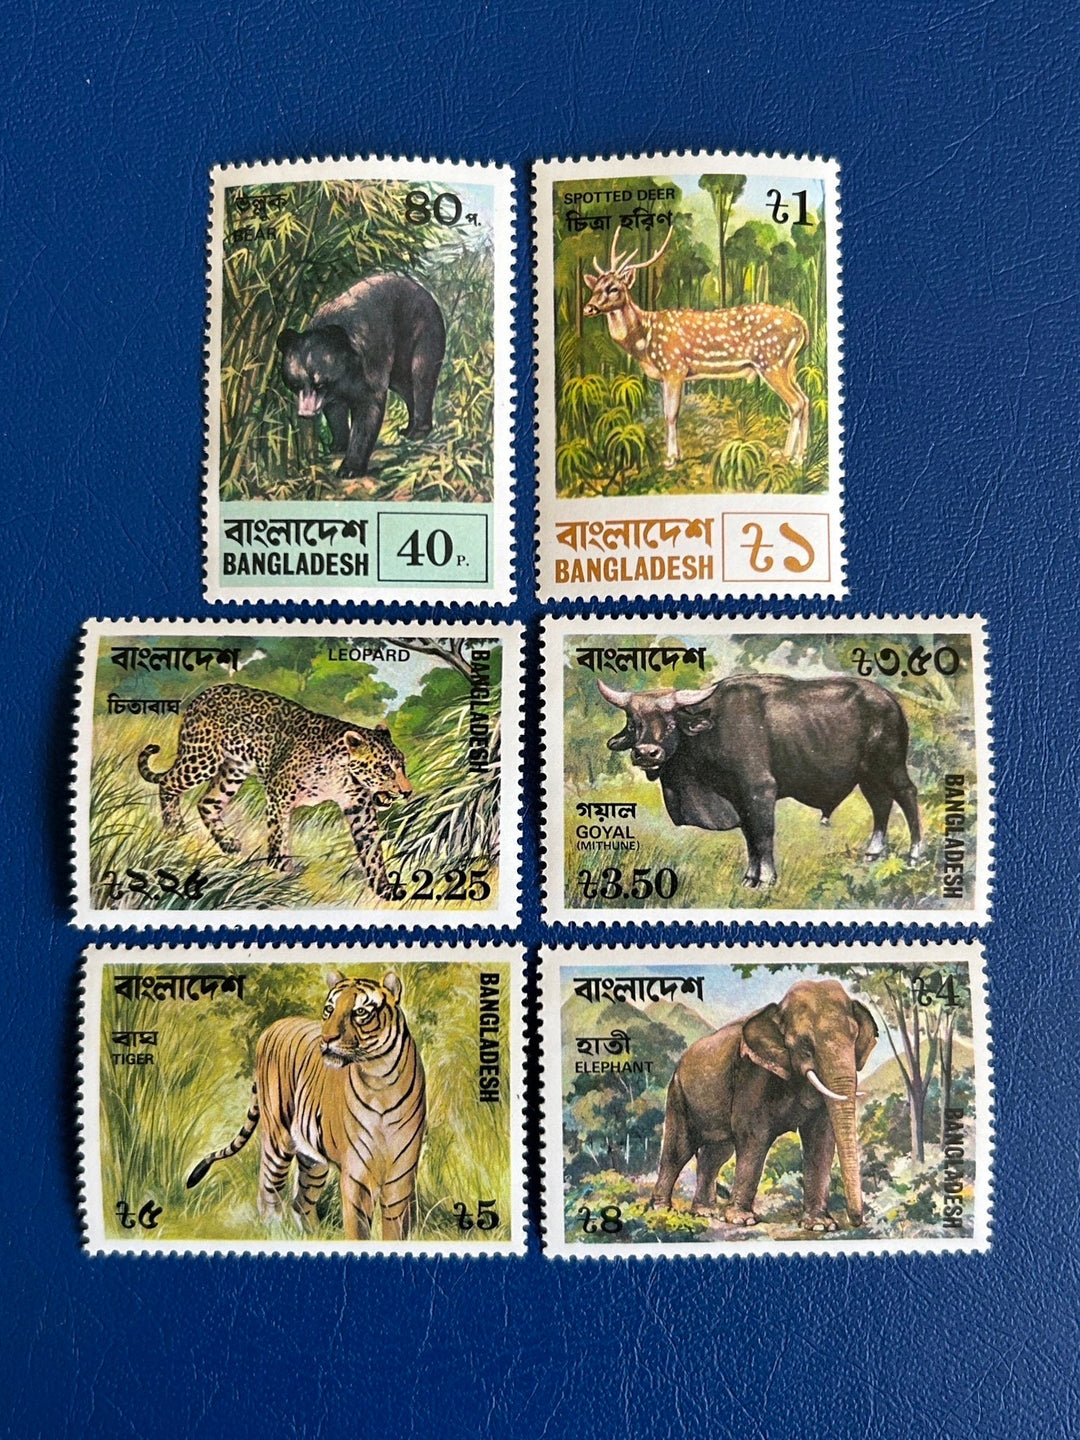 Bangladesh - Original Vintage Postage Stamps- 1977 - Fauna - for the collector, artist or collector - scrapbooks, decoupage